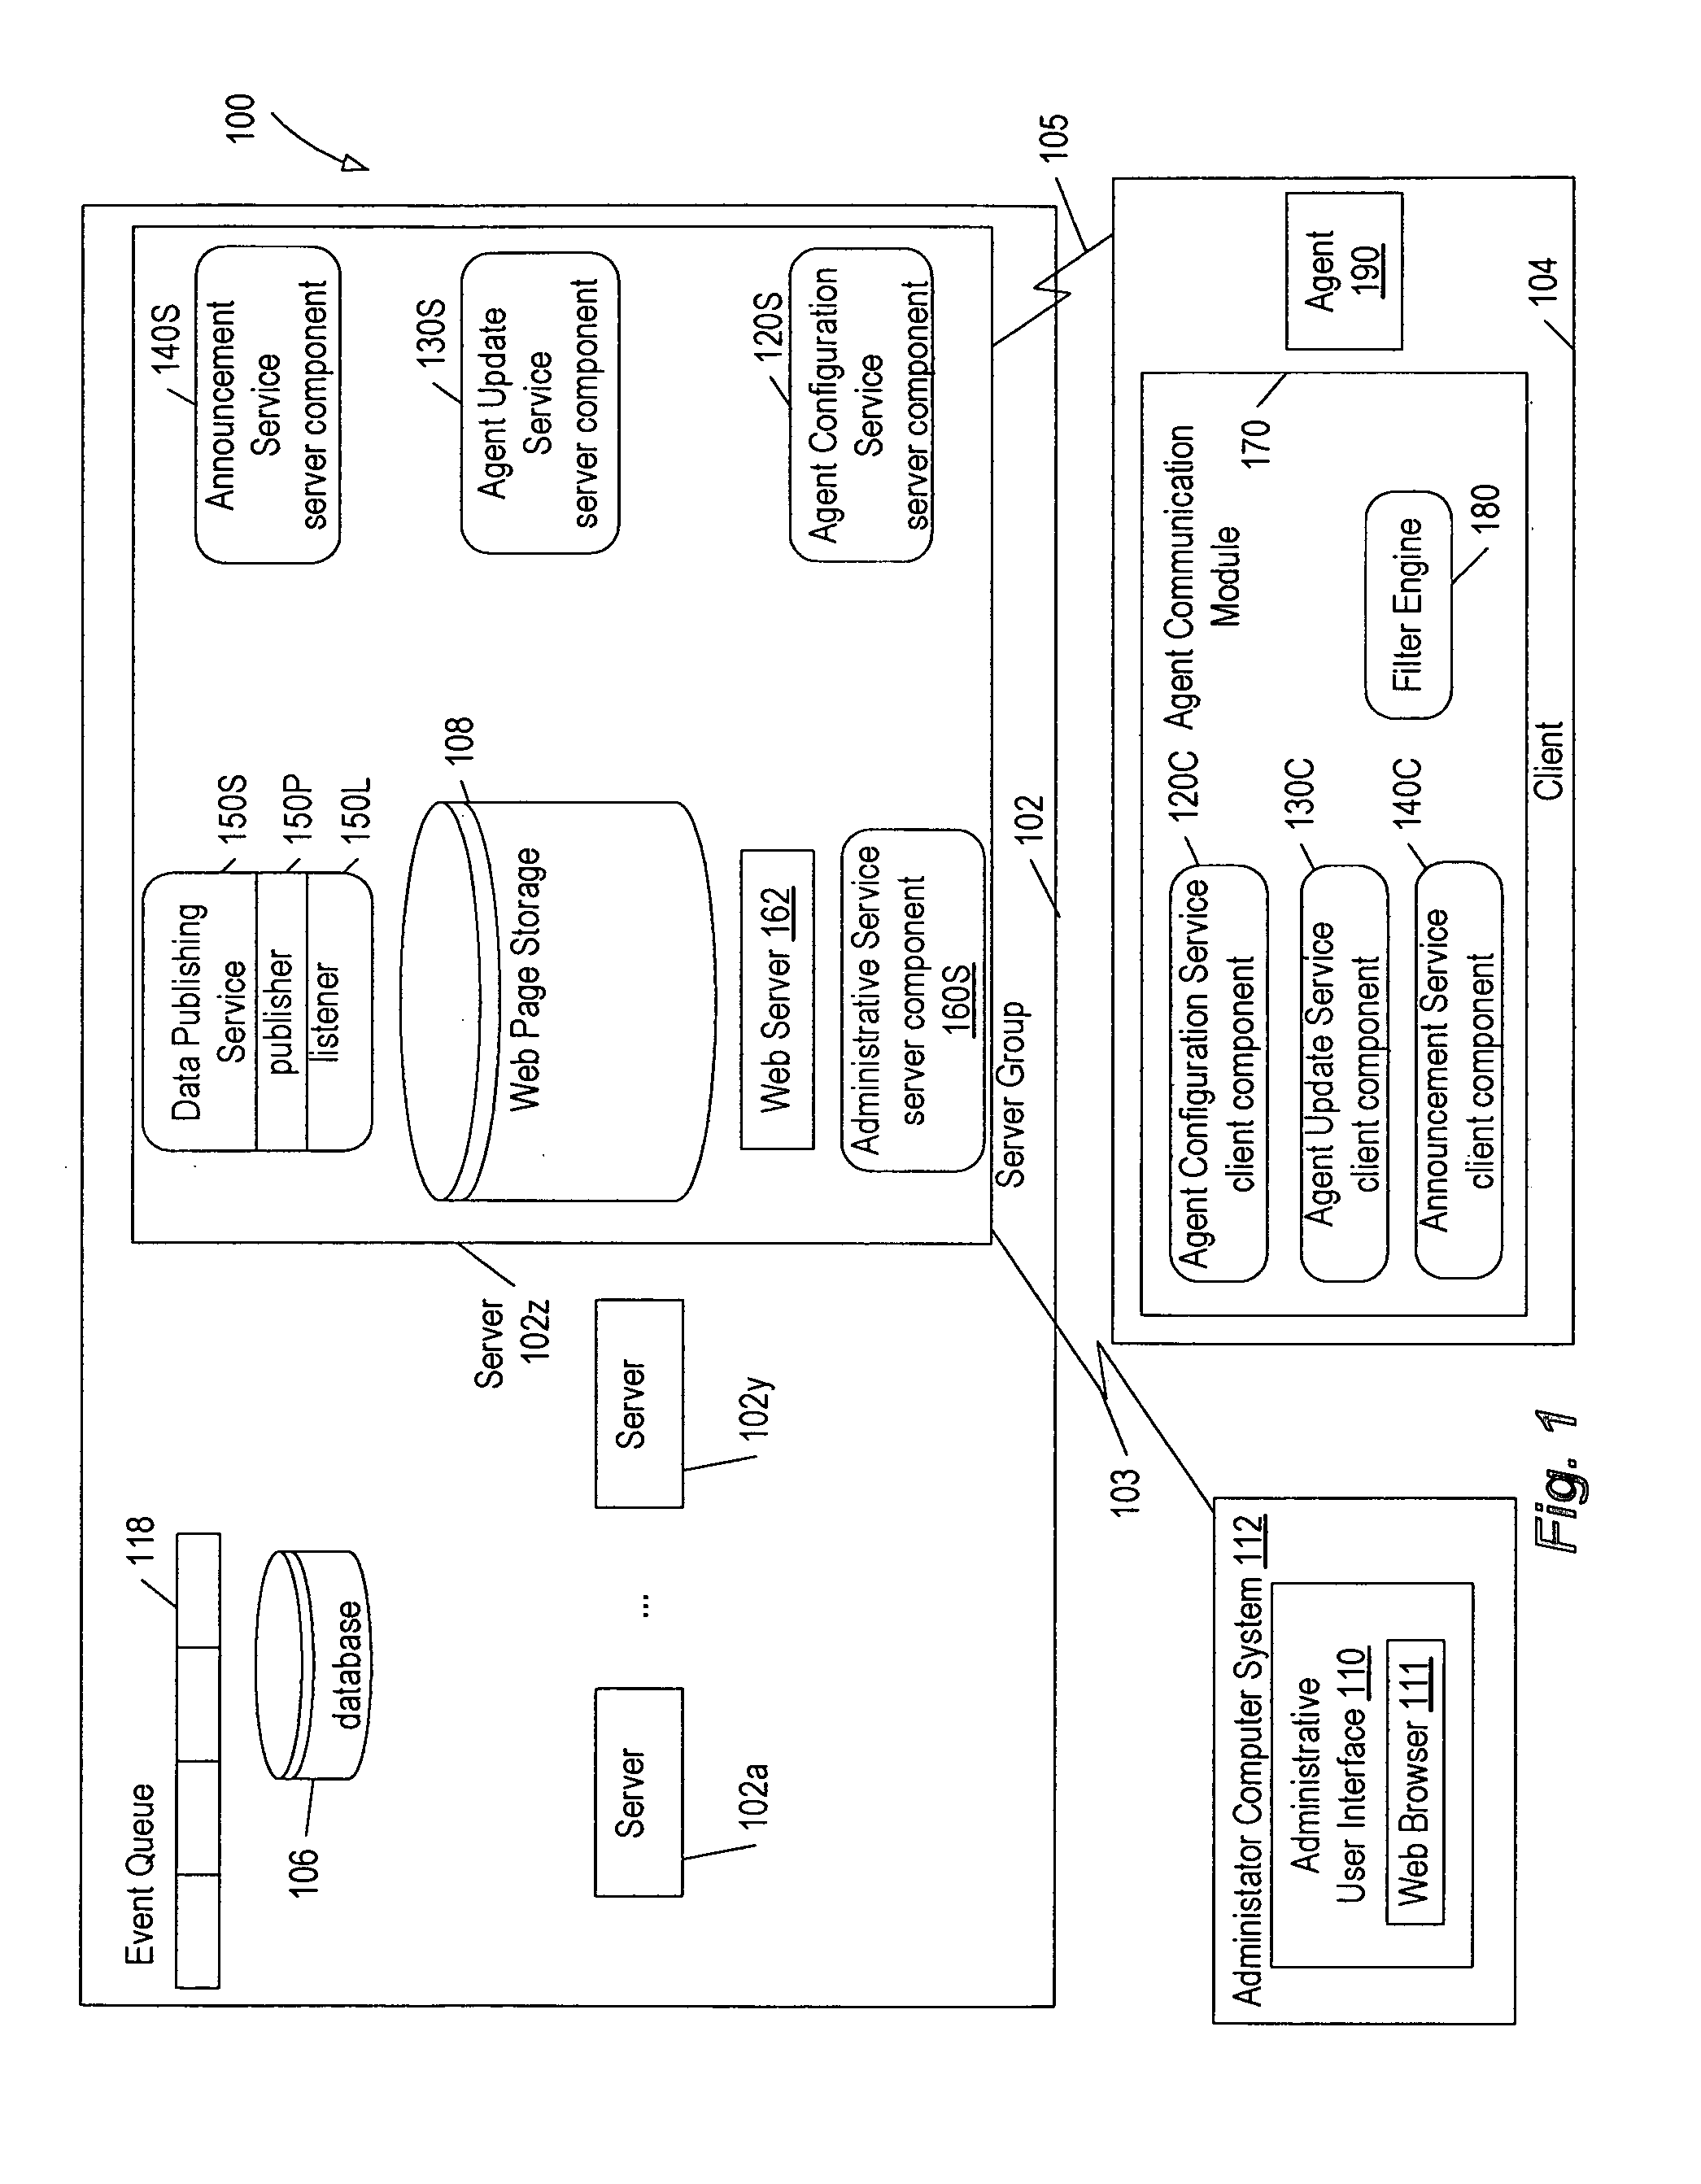 Large-scale targeted data distribution system